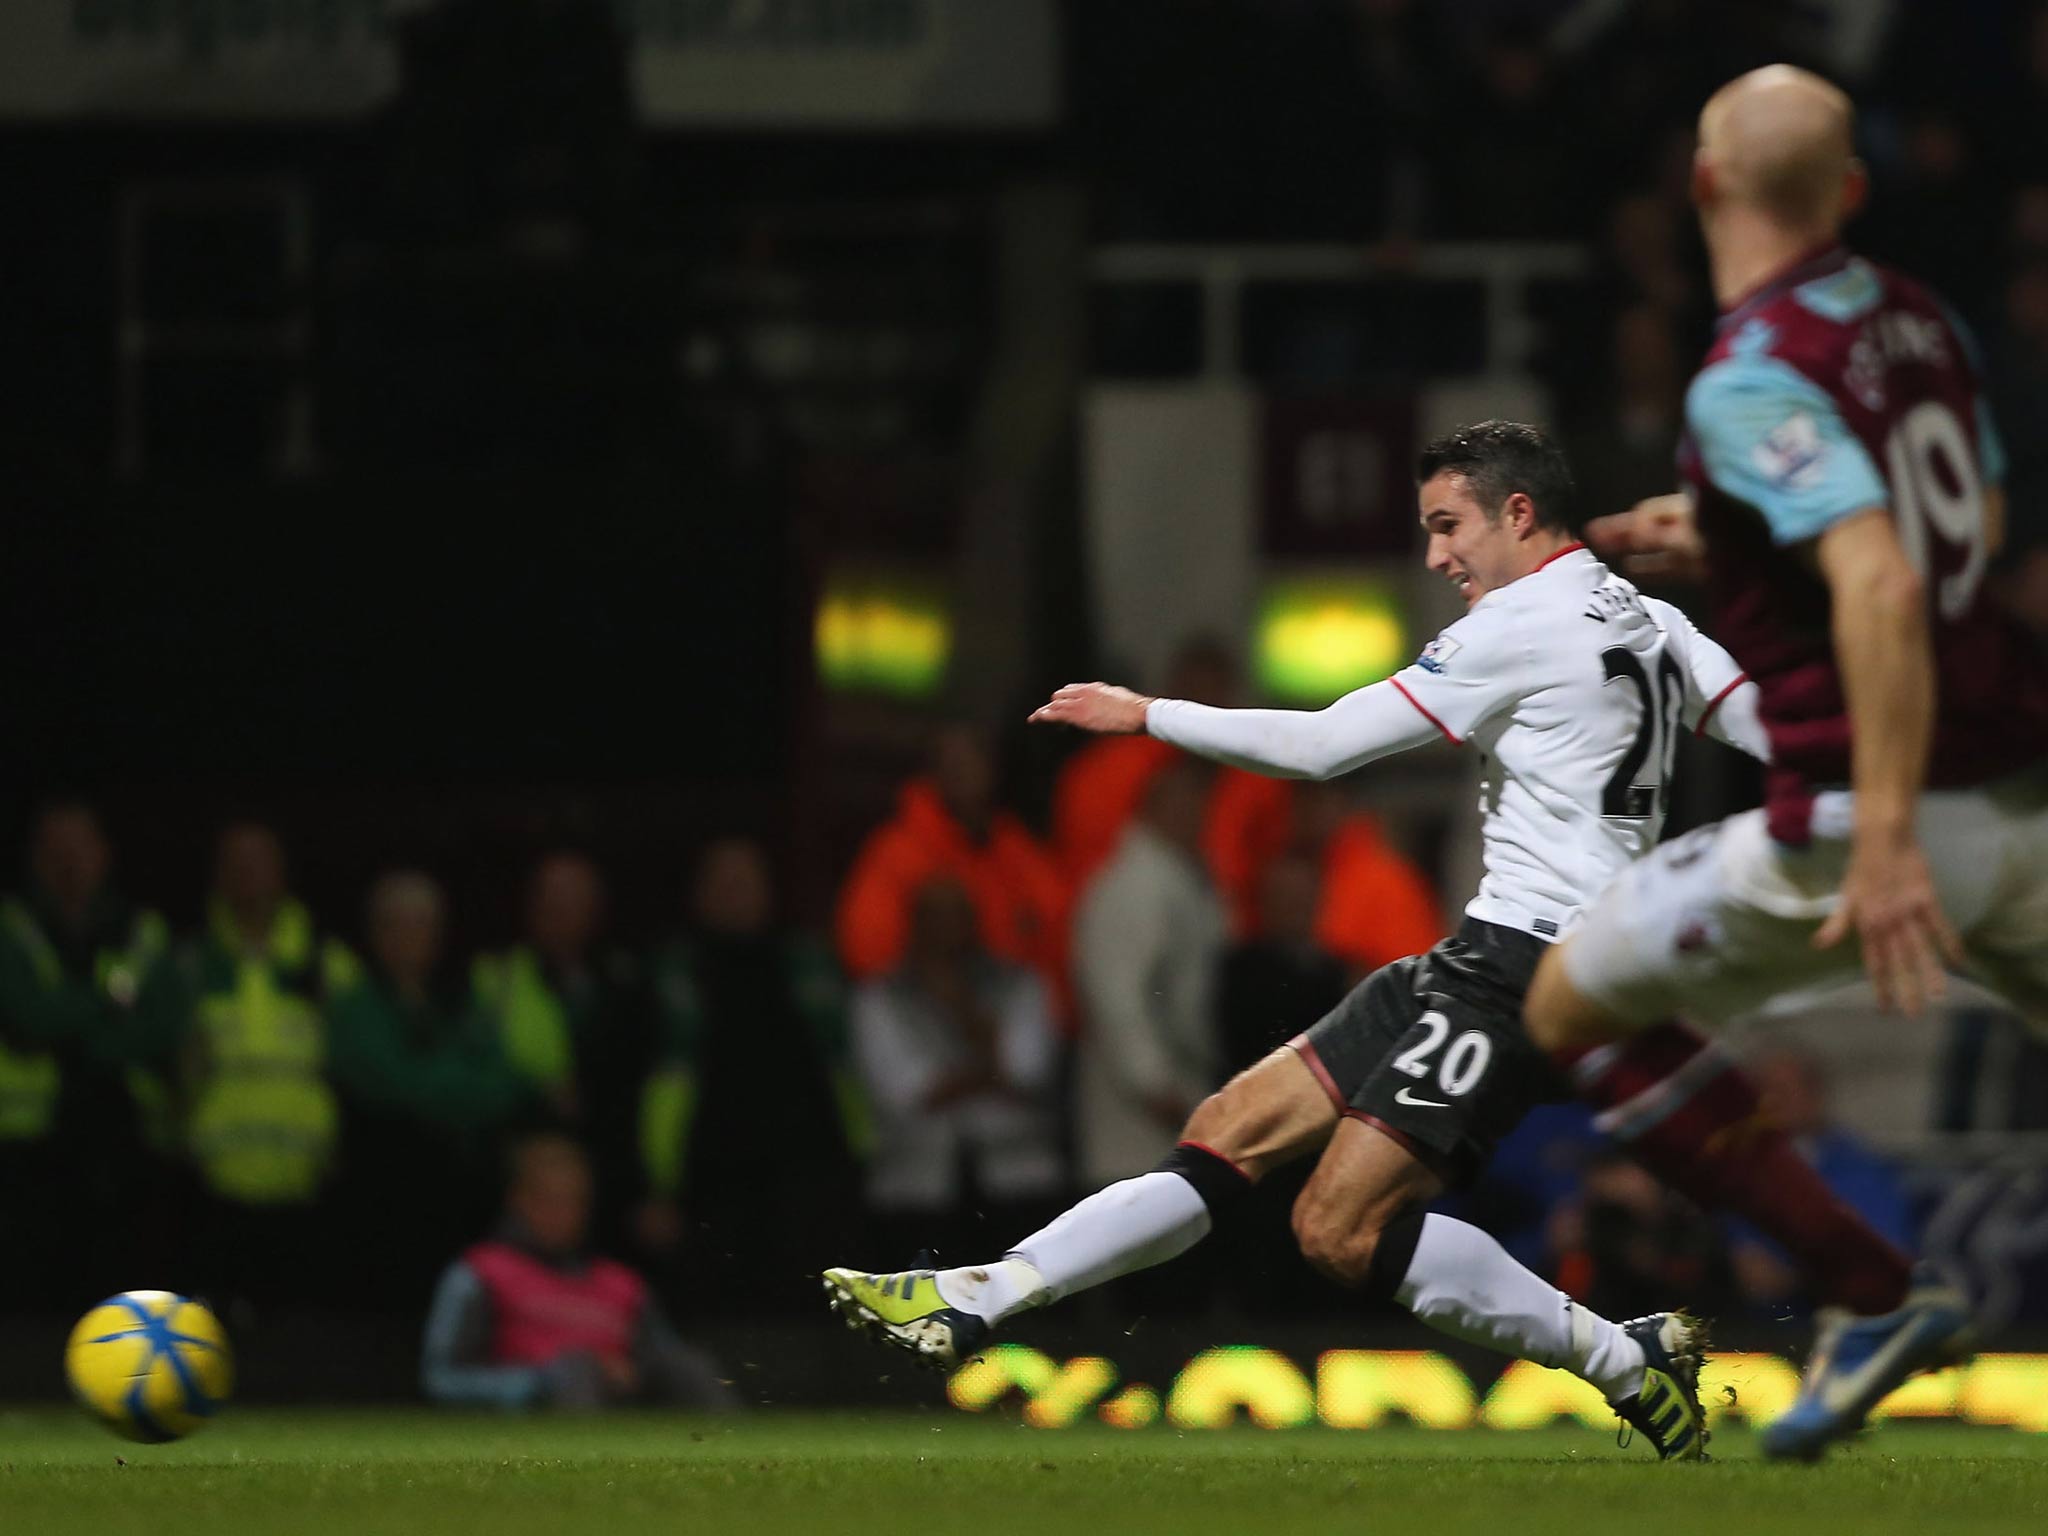 <b>West Ham United 2-2 Manchester United </b><br/>
<b>5 January 2013</b><br/>
<b>FA Cup </b><br/>

Van Persie came off the bench to score a stoppage time equaliser and keep Manchester United's hopes of winning their first FA Cup since 2004 alive. Ferguson